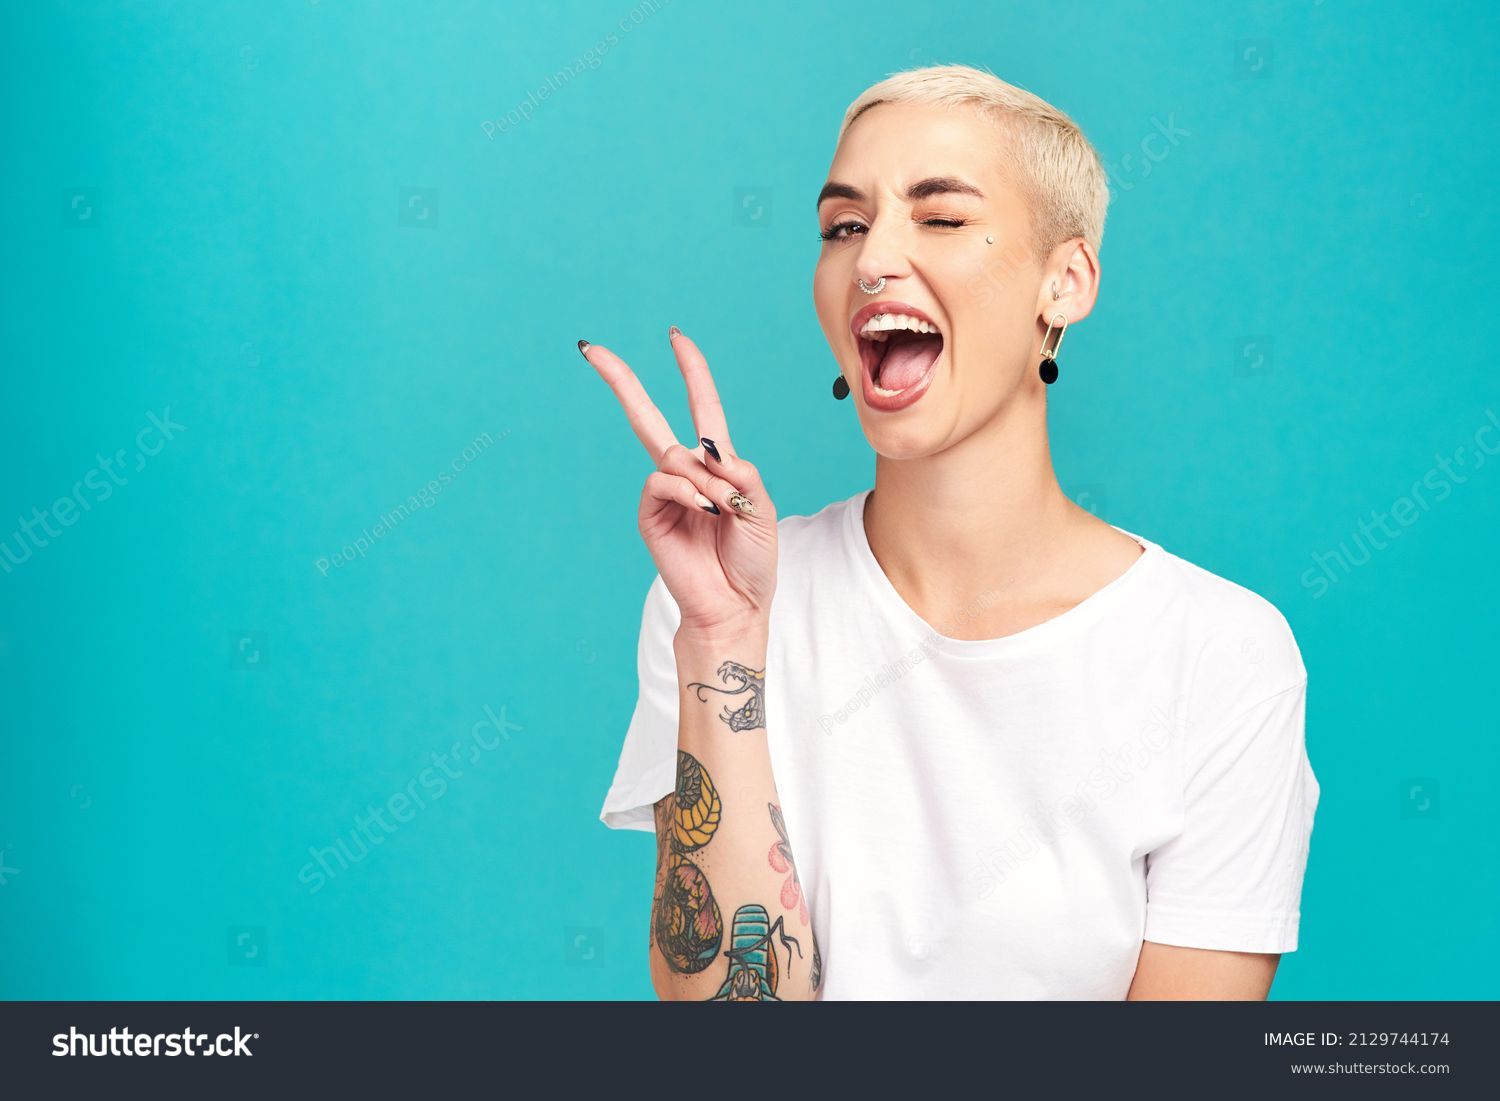 Fill the world with happiness. Studio shot of a confident young woman making a peace gesture against a turquoise background. #2129744174